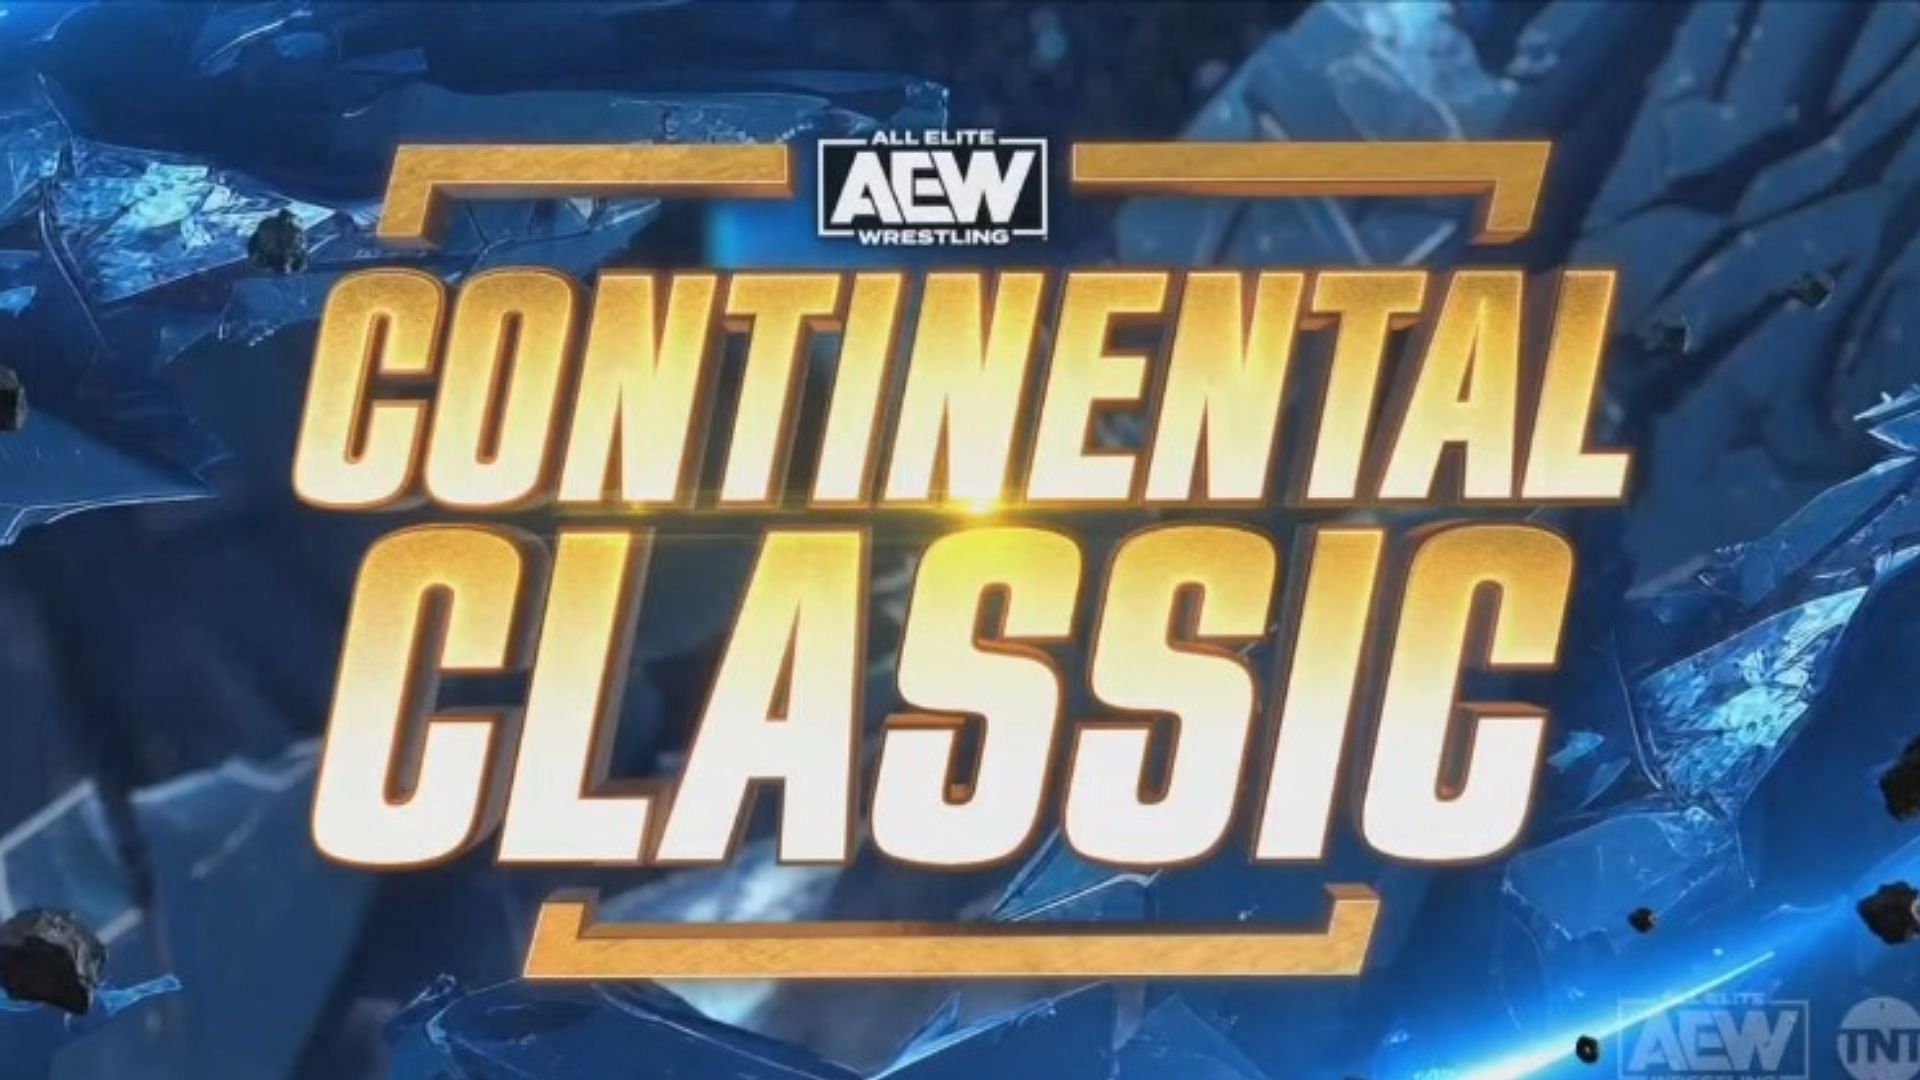 AEW Continental Classic begins this Wednesday on Dynamite